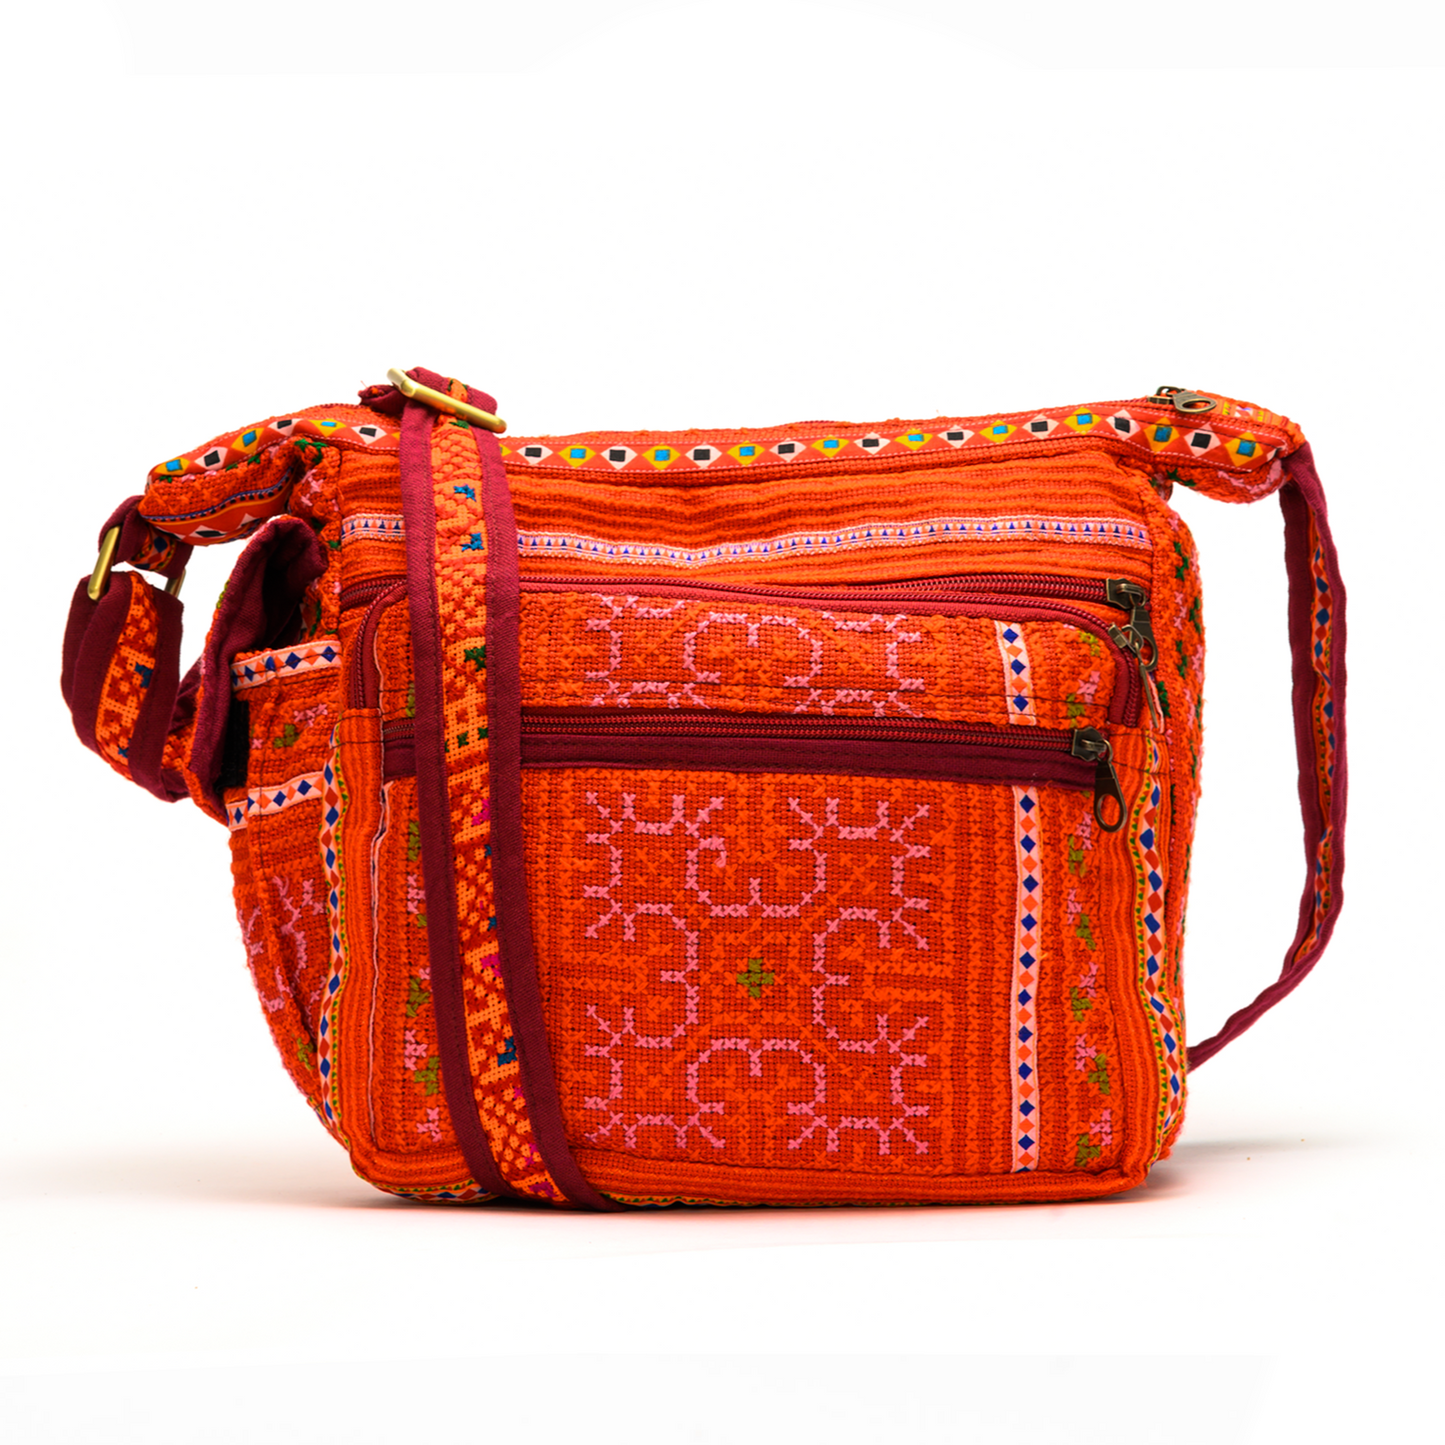 Boho-style linen, embroidery cross-body bag, H'mong tribal pattern in RED